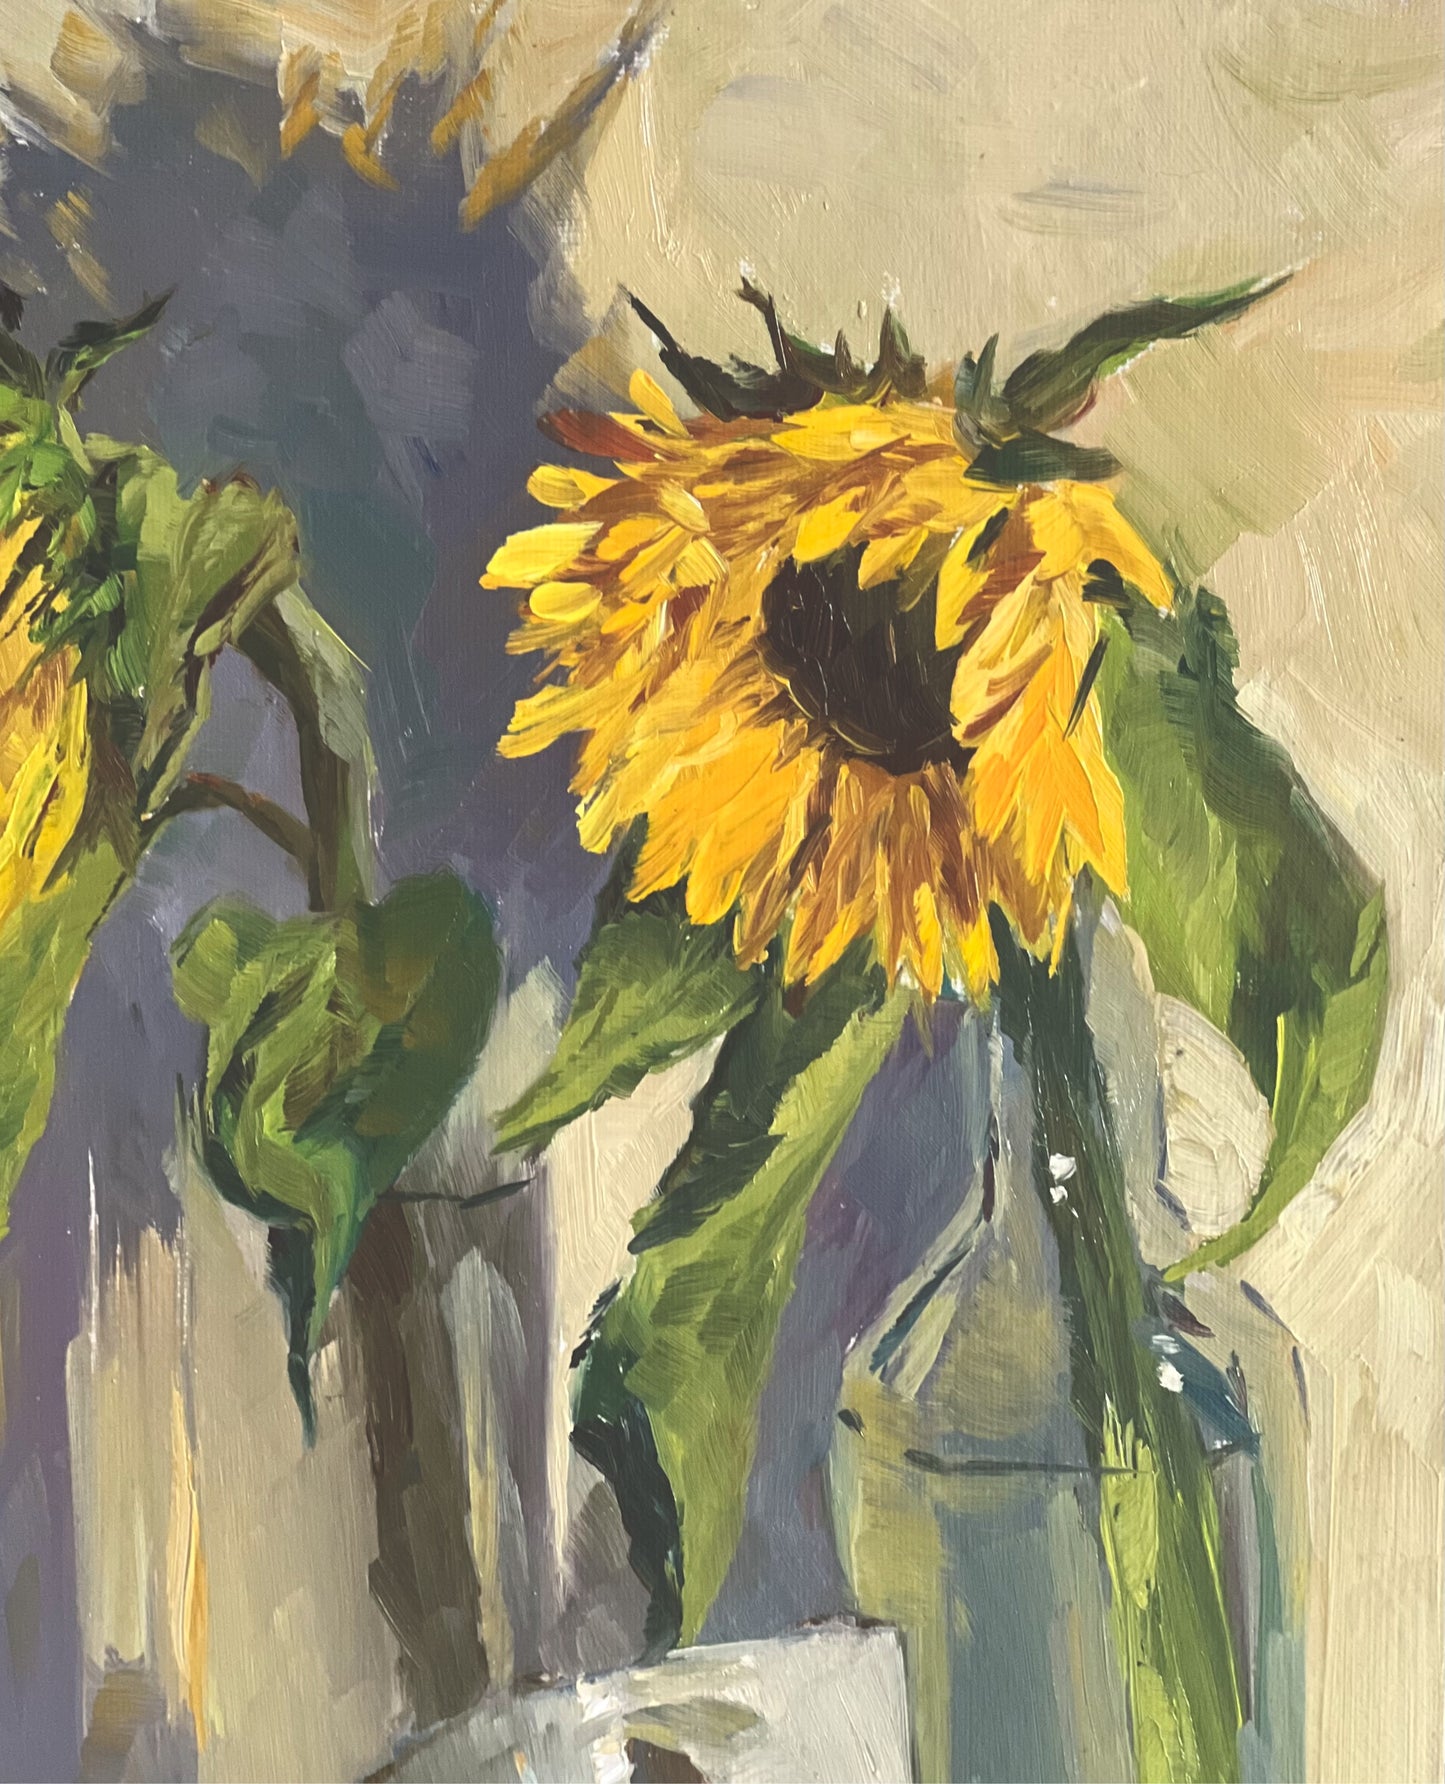 Sunflower Series 14 - Original Stilllife Painting, 8 by 12 inches